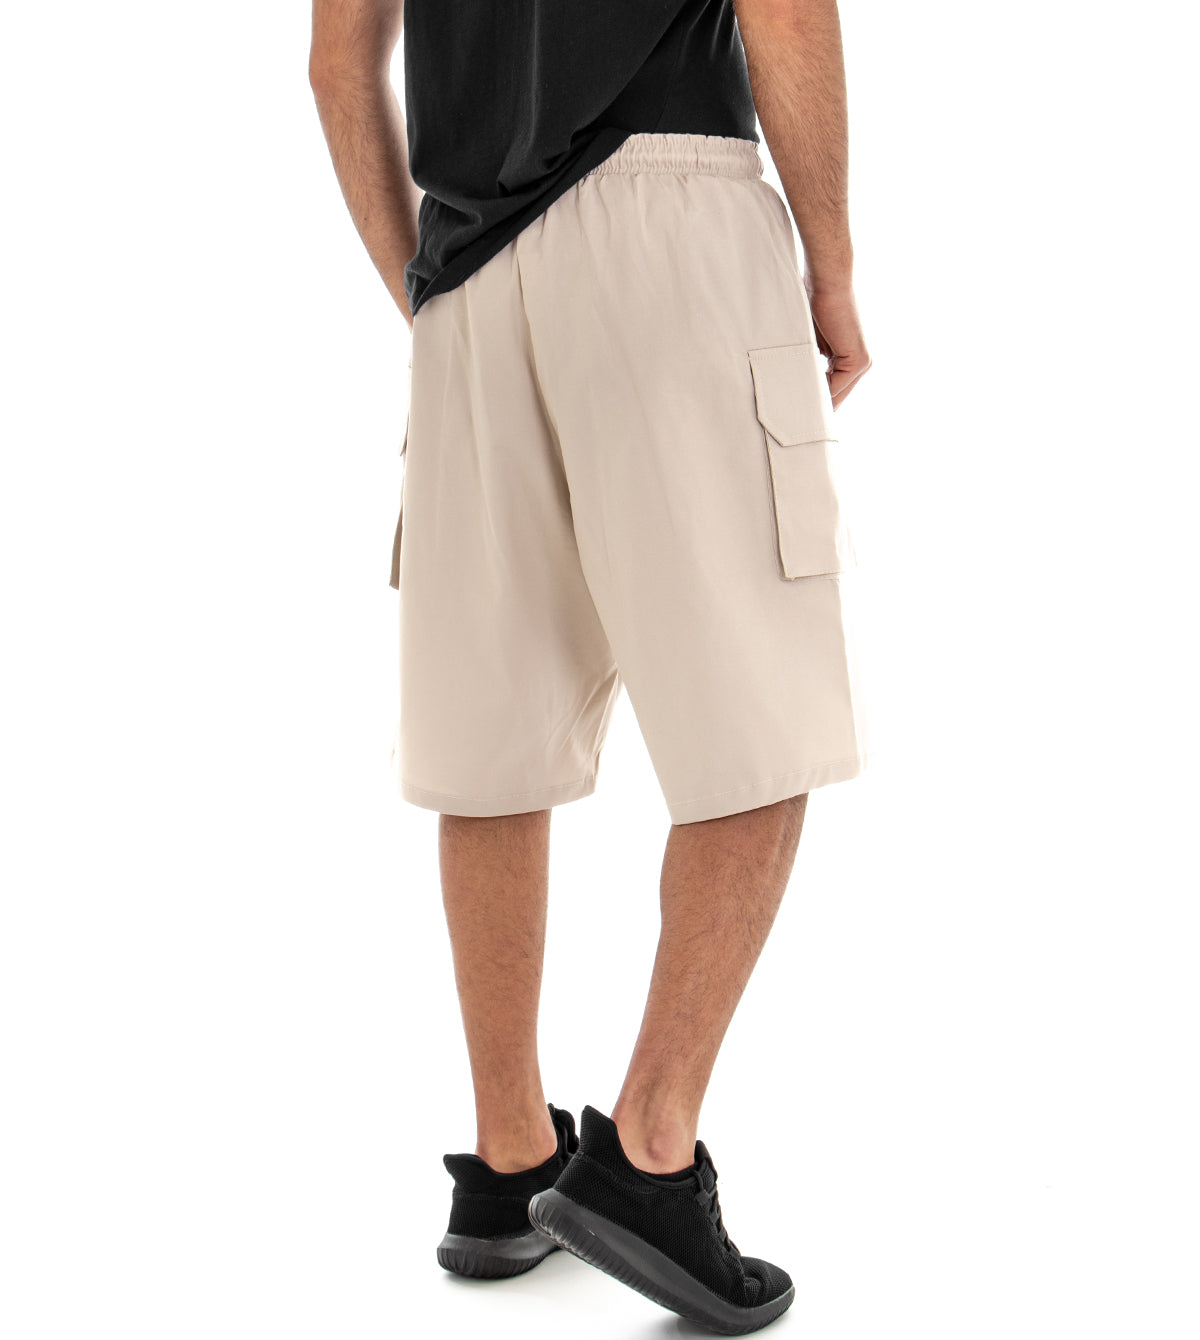 Beige Men's Bermuda Shorts with Low Elastic Crotch GIOSAL-PC1347A